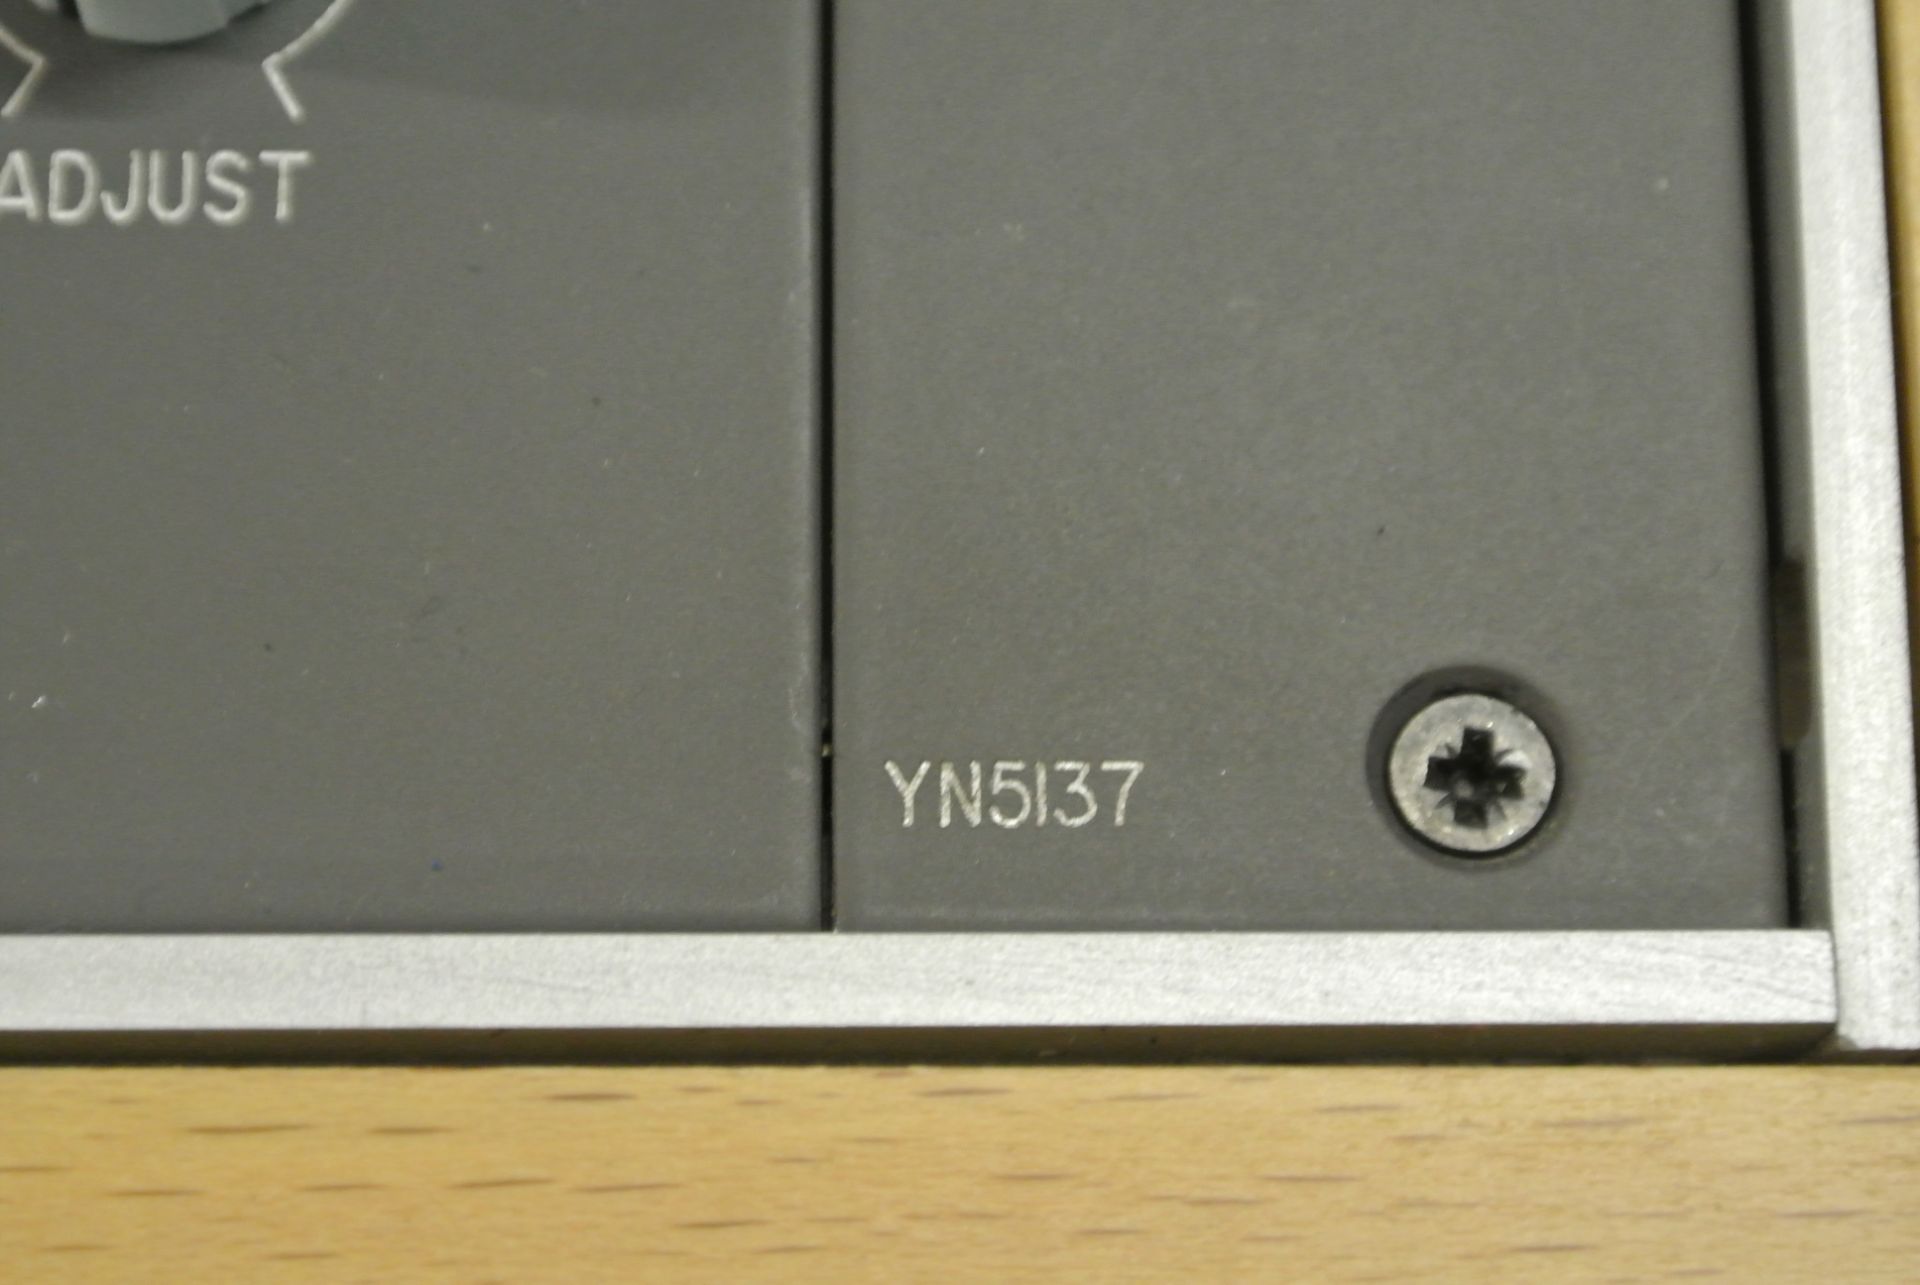 CALREC MY4I22 + YN5I37 Broadcast Studio Mixer Module - With IPE Wooden Surround and Holding Case - Image 5 of 6